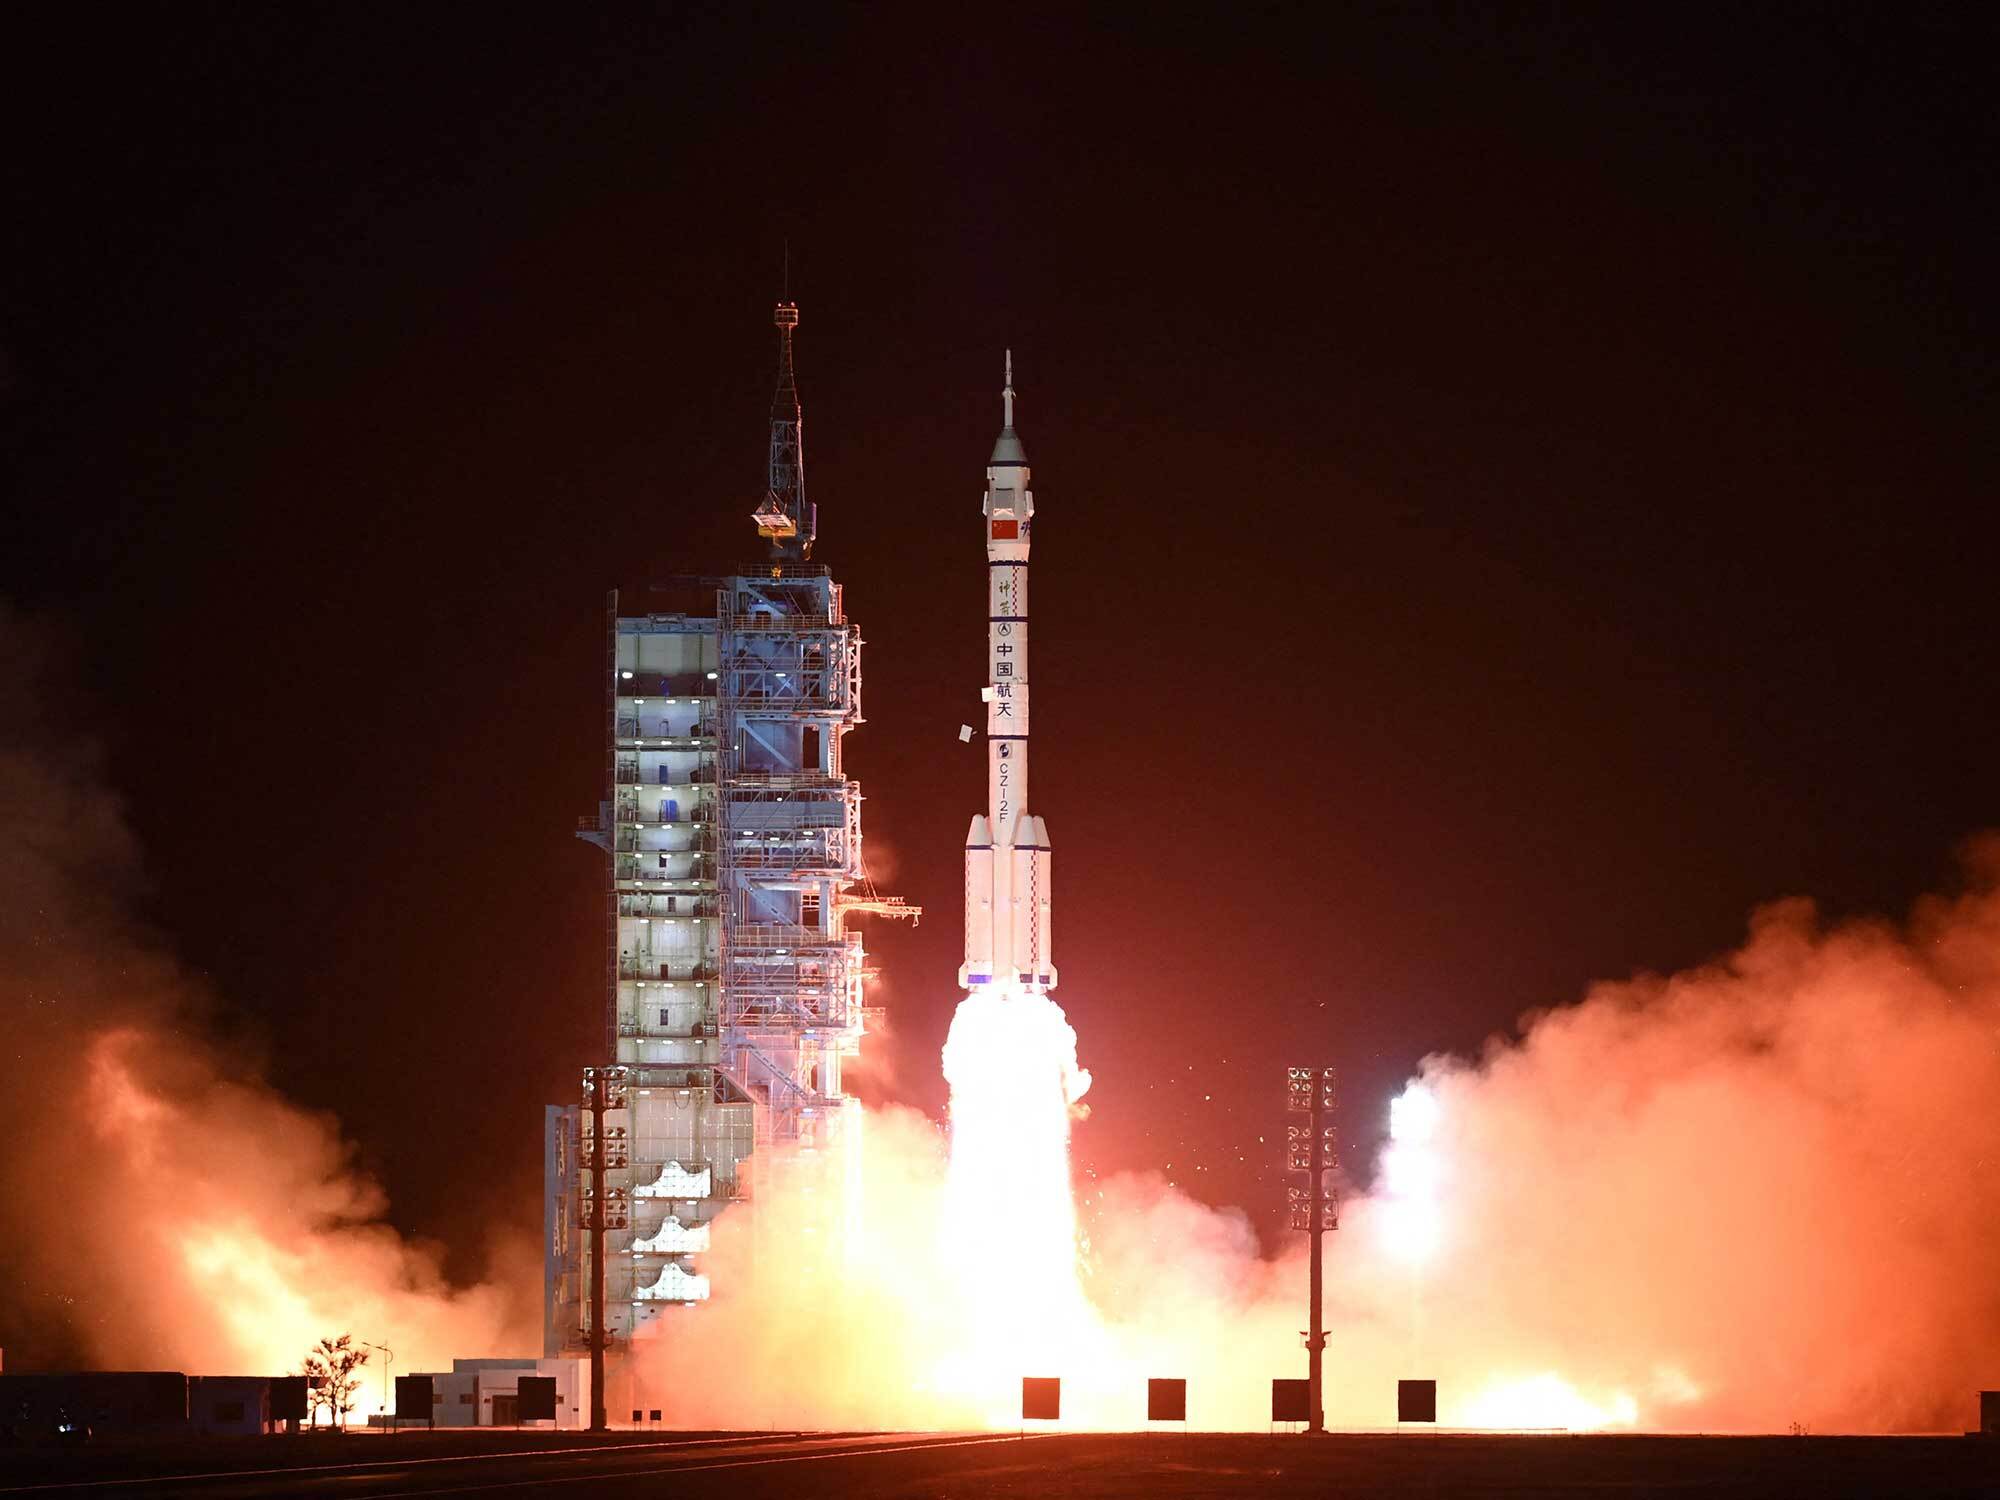 China’s astronauts embark on a direct trip to their brand new space station thumbnail